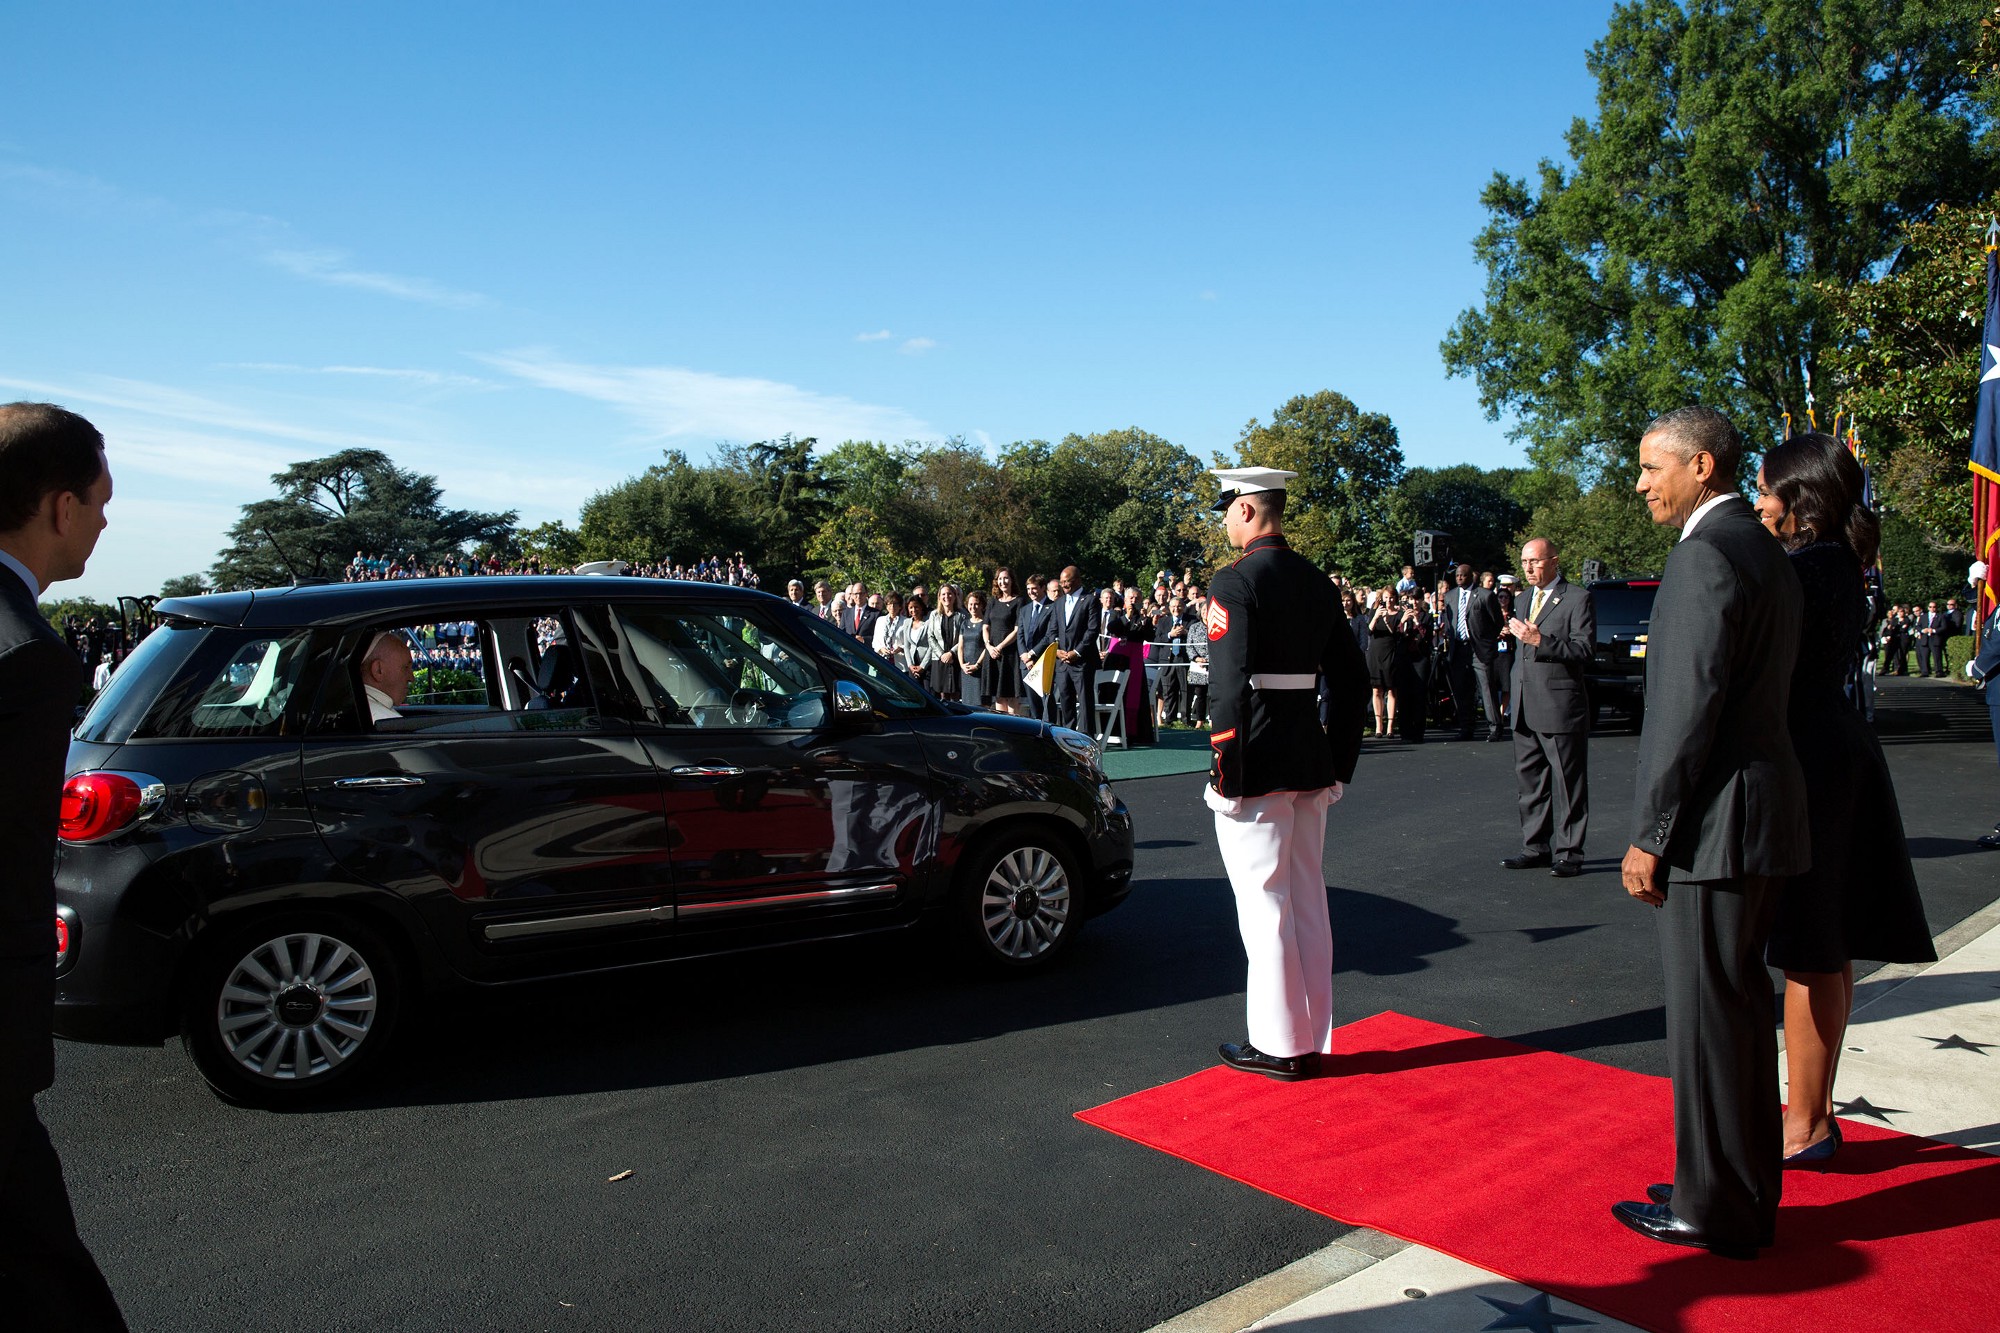 President Obama and the First Lady wait to greet Pope Francis as he arrives. (Official White House Photo by Pete Souza)